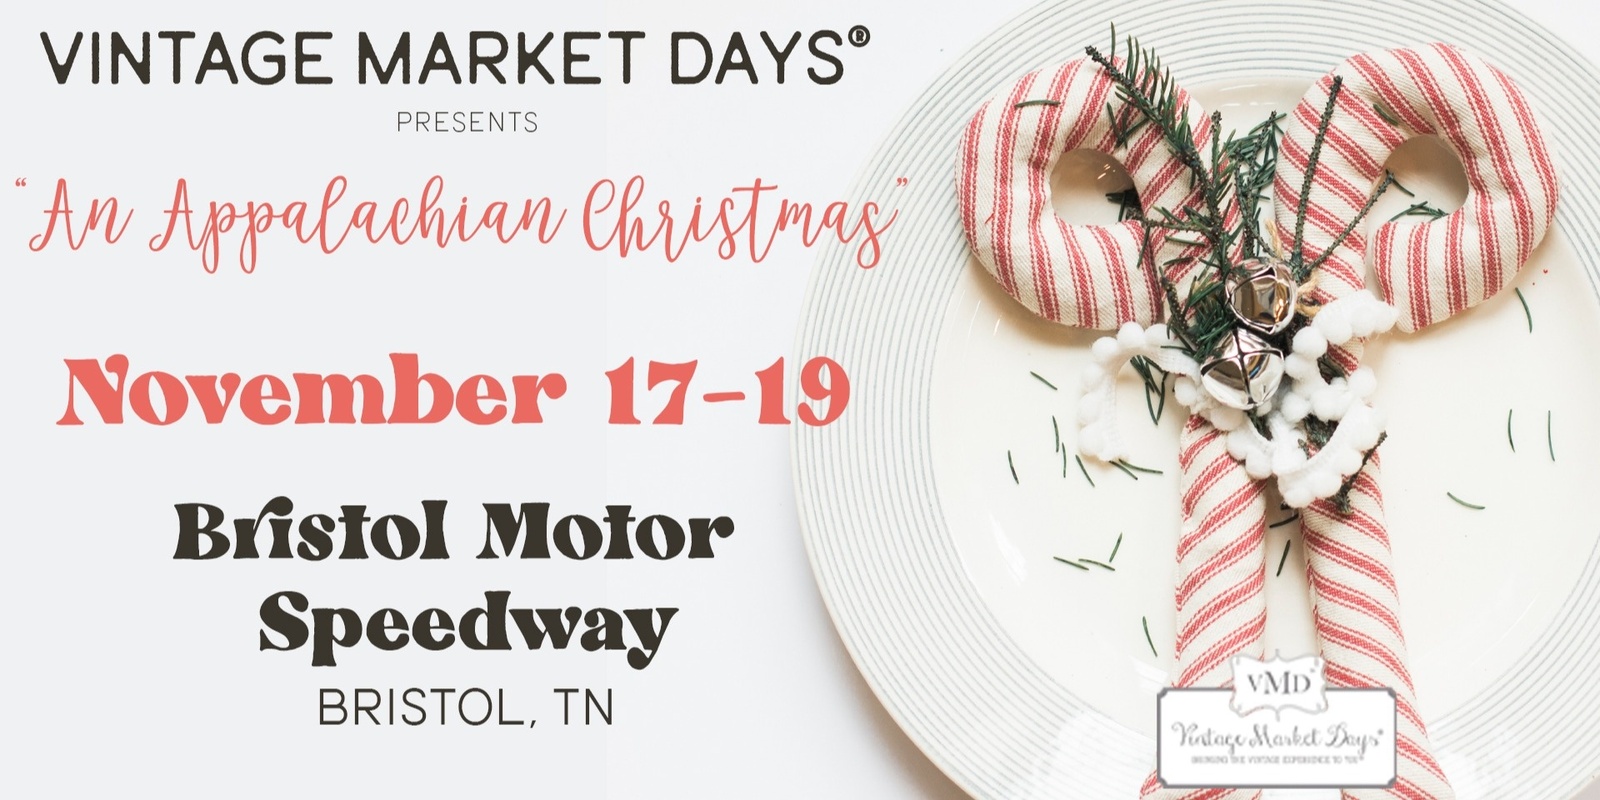 Vintage Market Days® TriCities Tennessee "An Appalachian Christmas